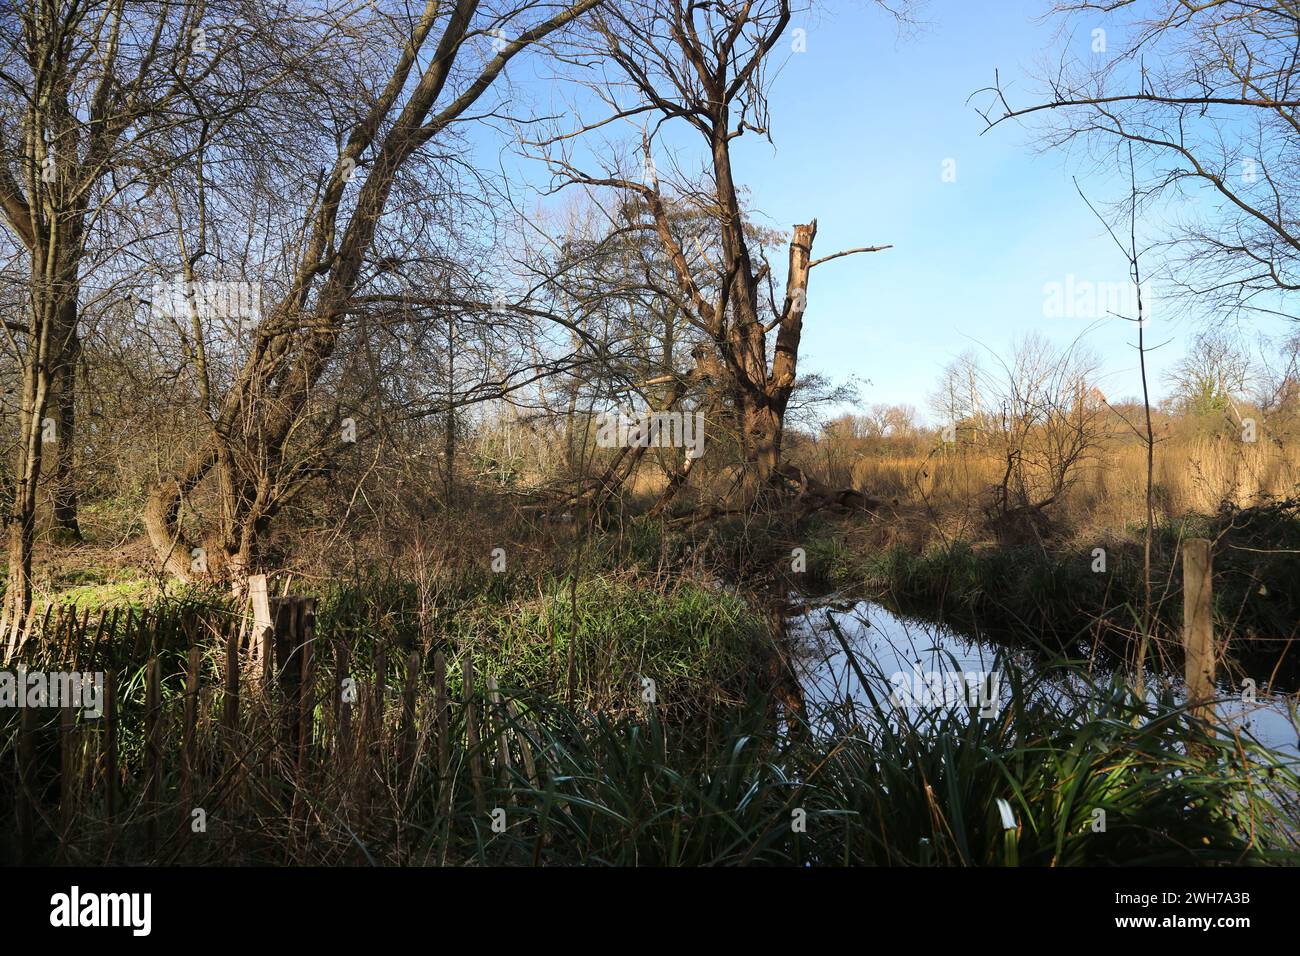 Morden Hall Park Trees on the Banks of the River Wandle London England Stock Photo